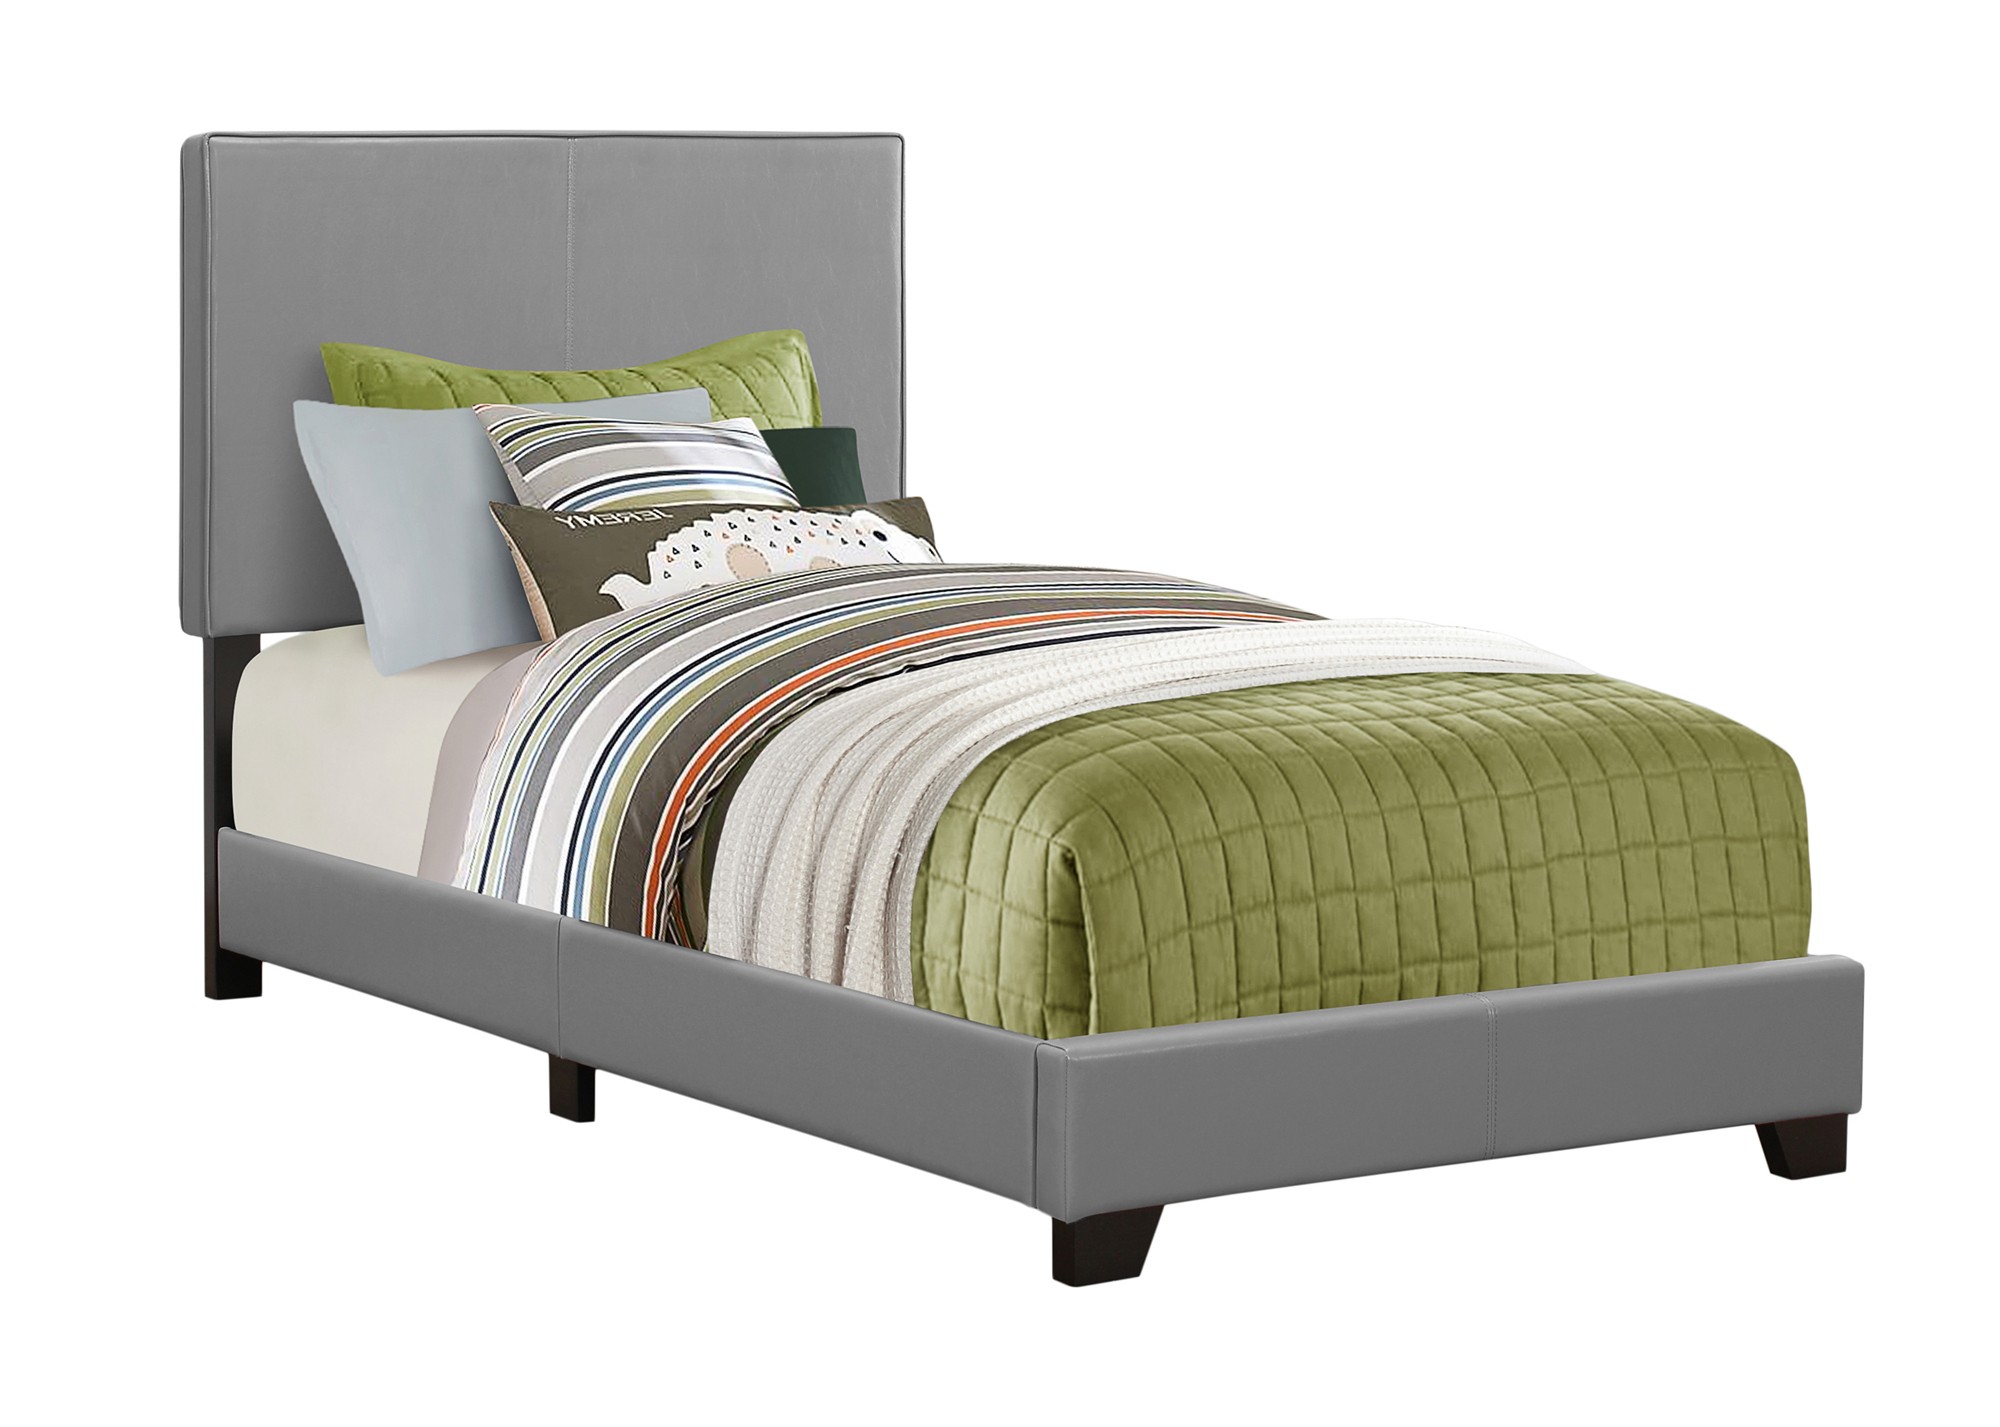 81" x 43" x 45.75" Grey Foam Solid Wood Leather Look Twin Size Bed